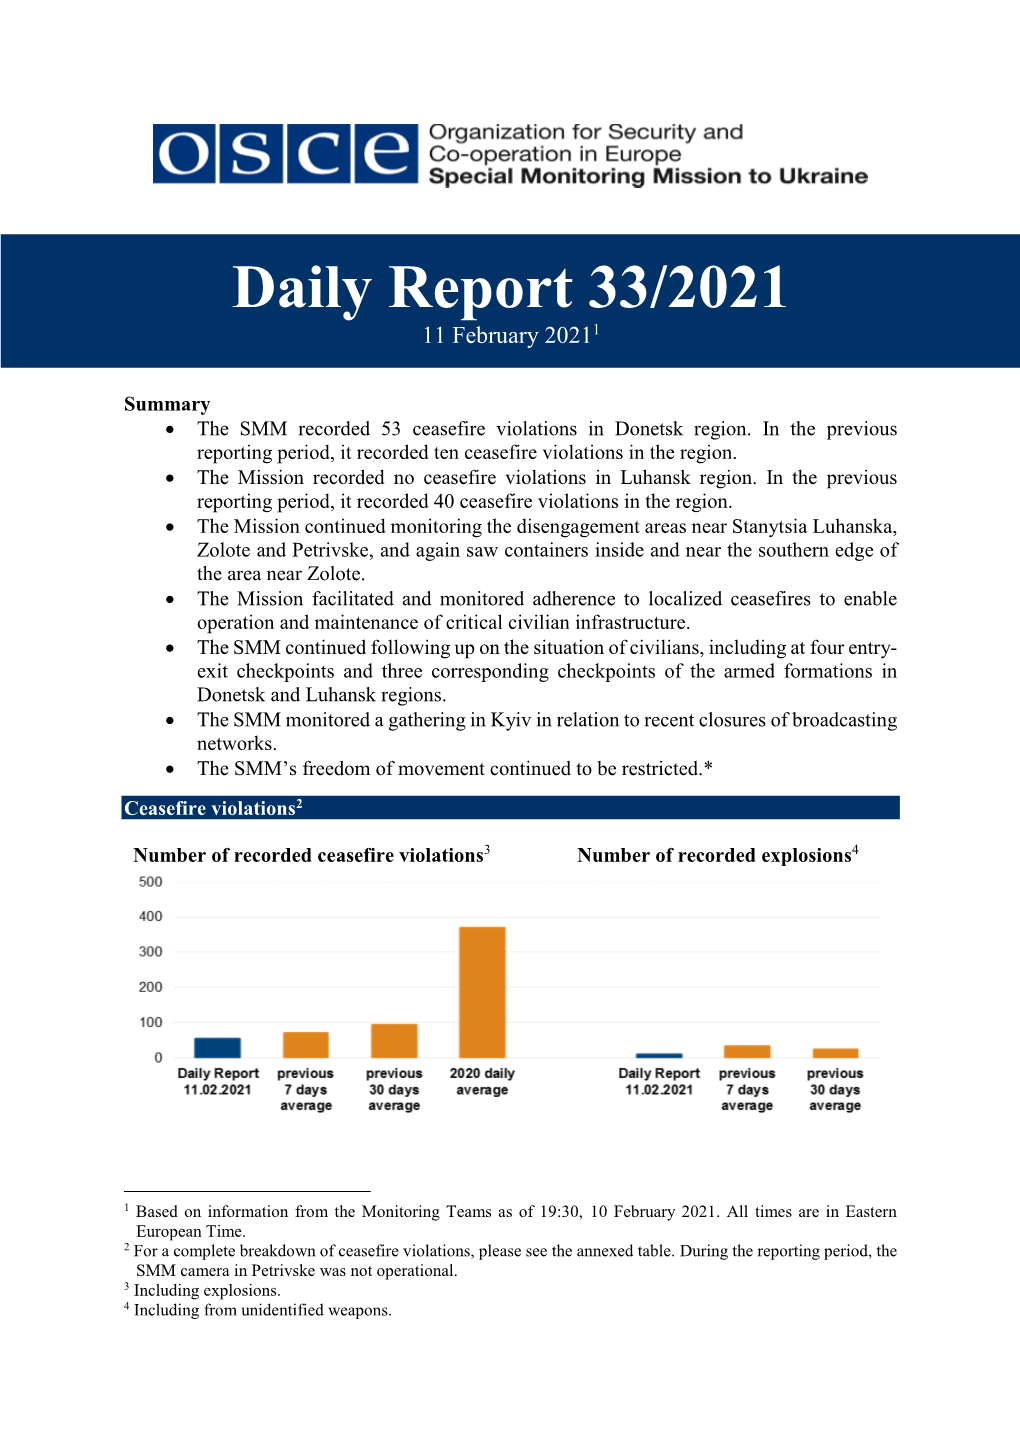 Daily Report 33/2021 11 February 20211